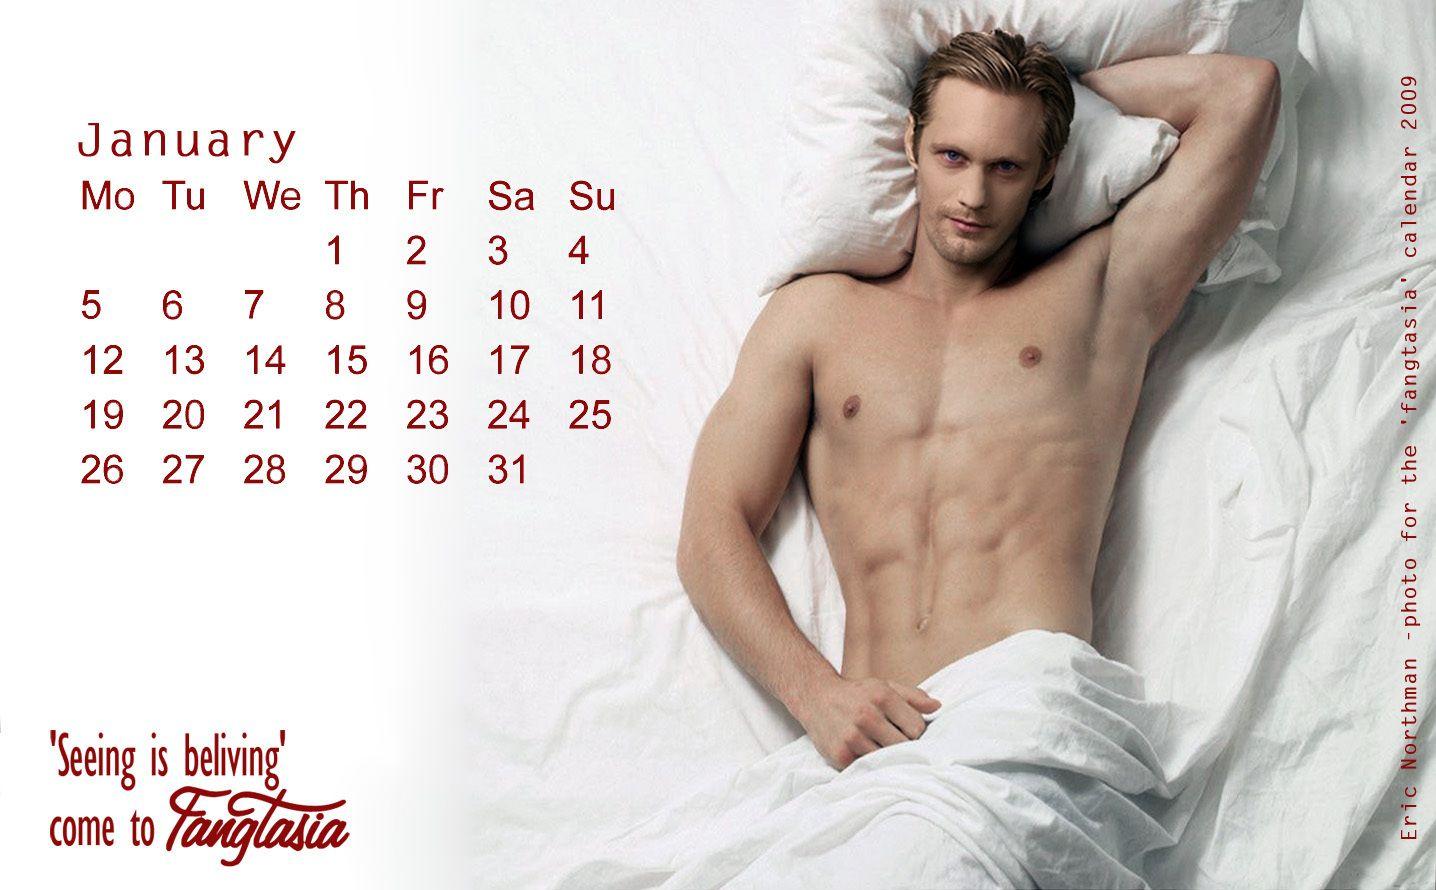 Twilight Vs. True Blood image Calender HD wallpaper and background